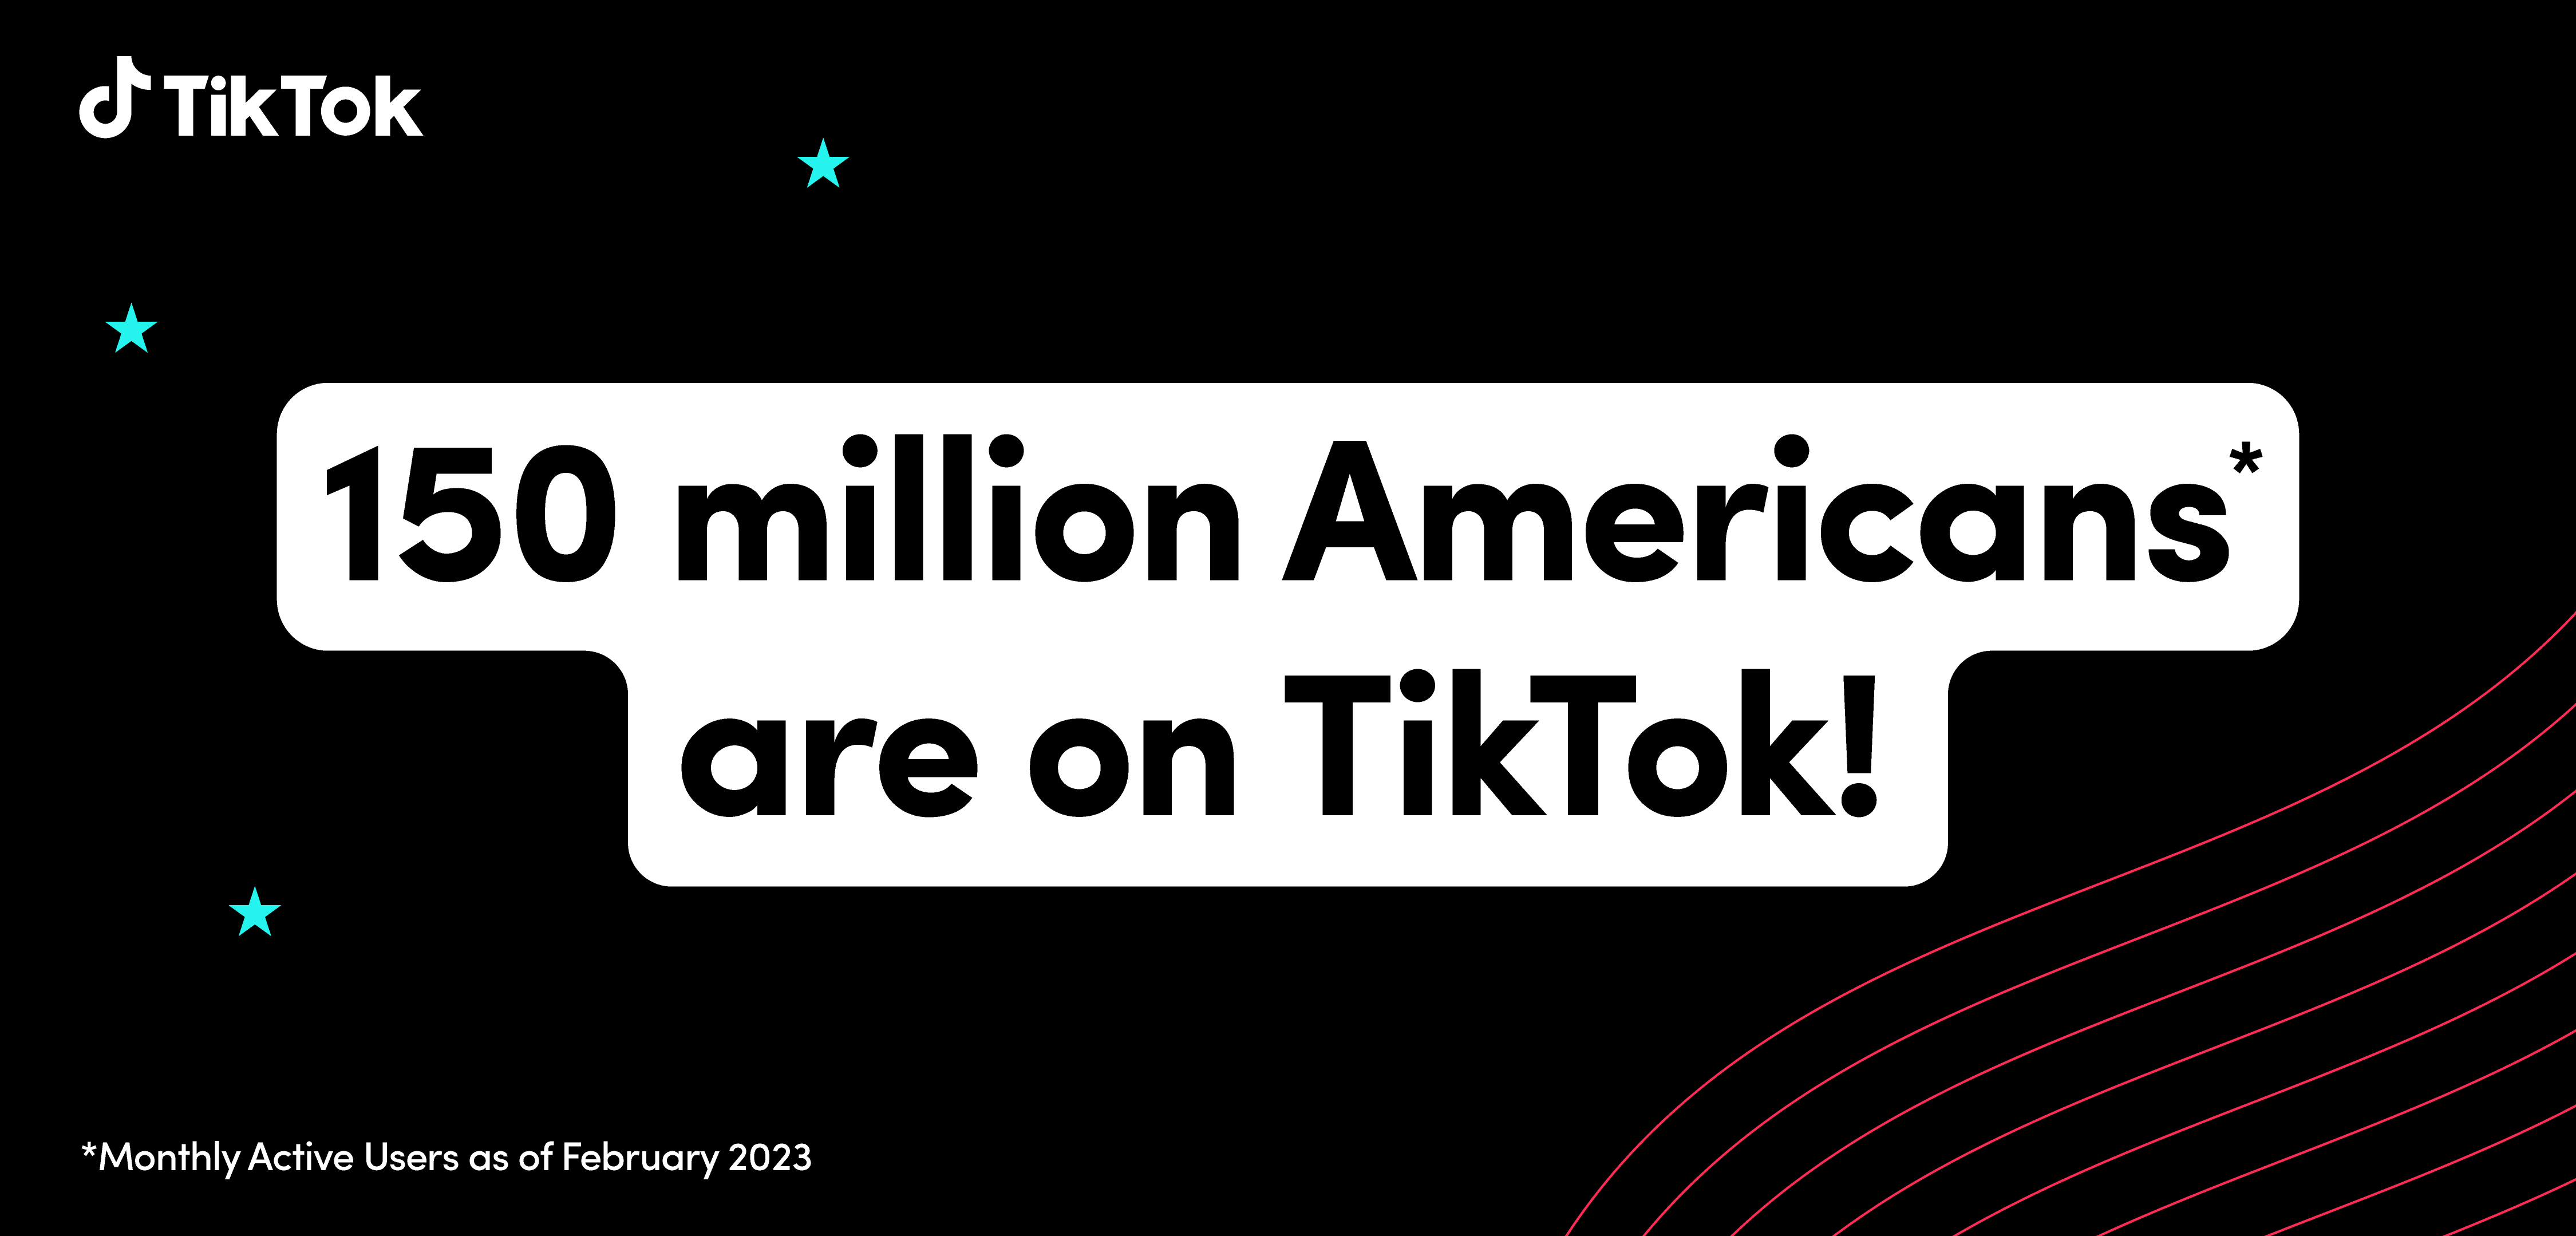 The TikTok Logo: History and Why It Works (2023)